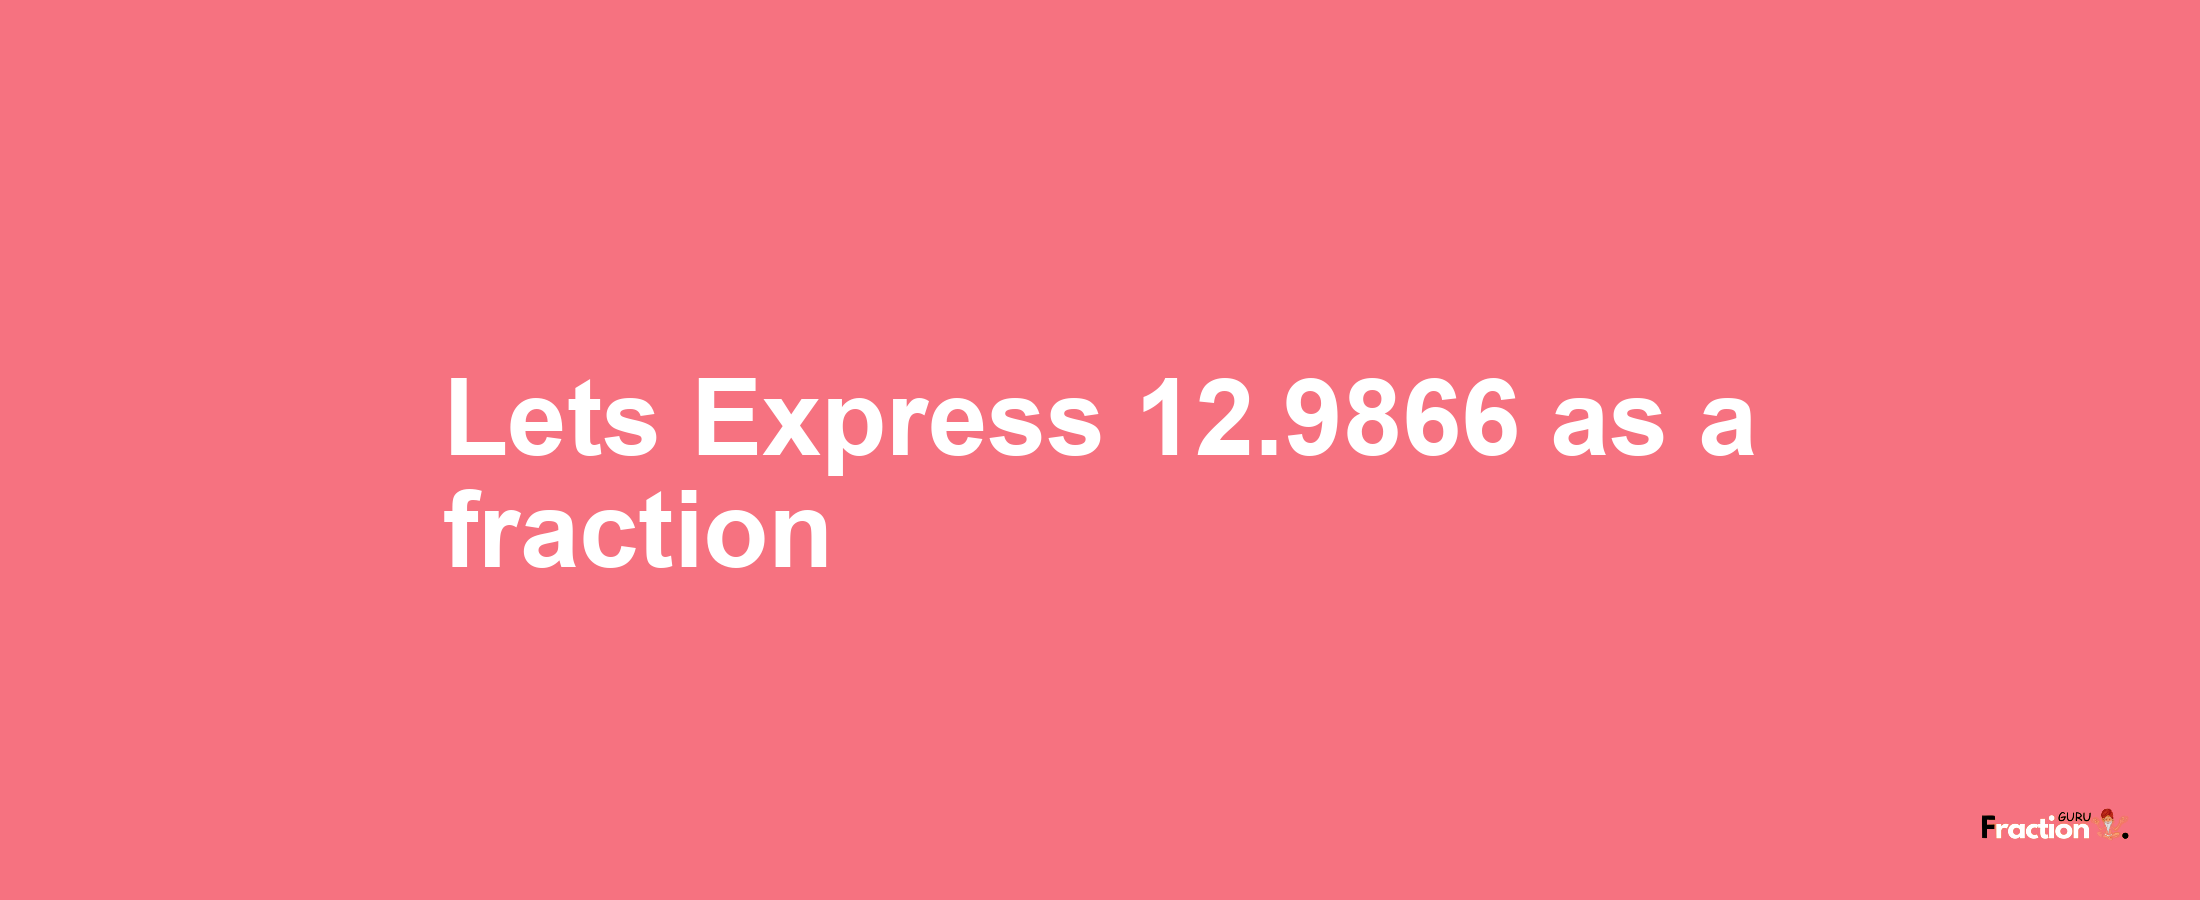 Lets Express 12.9866 as afraction